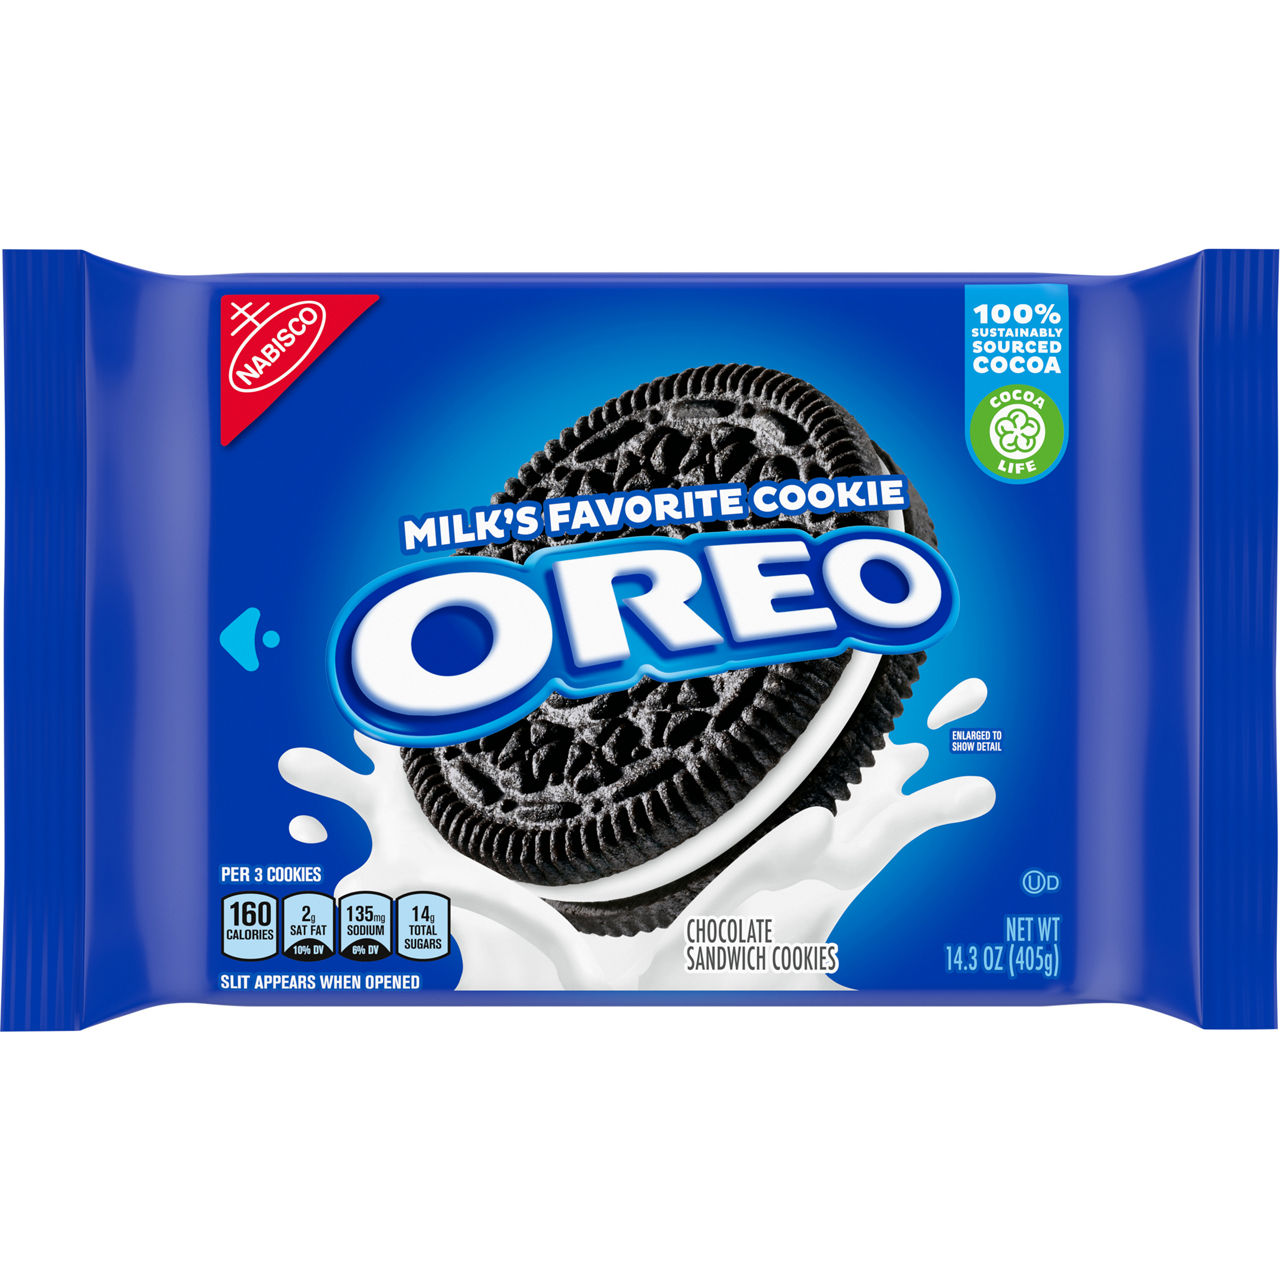 OREO BISCUITS 266GM